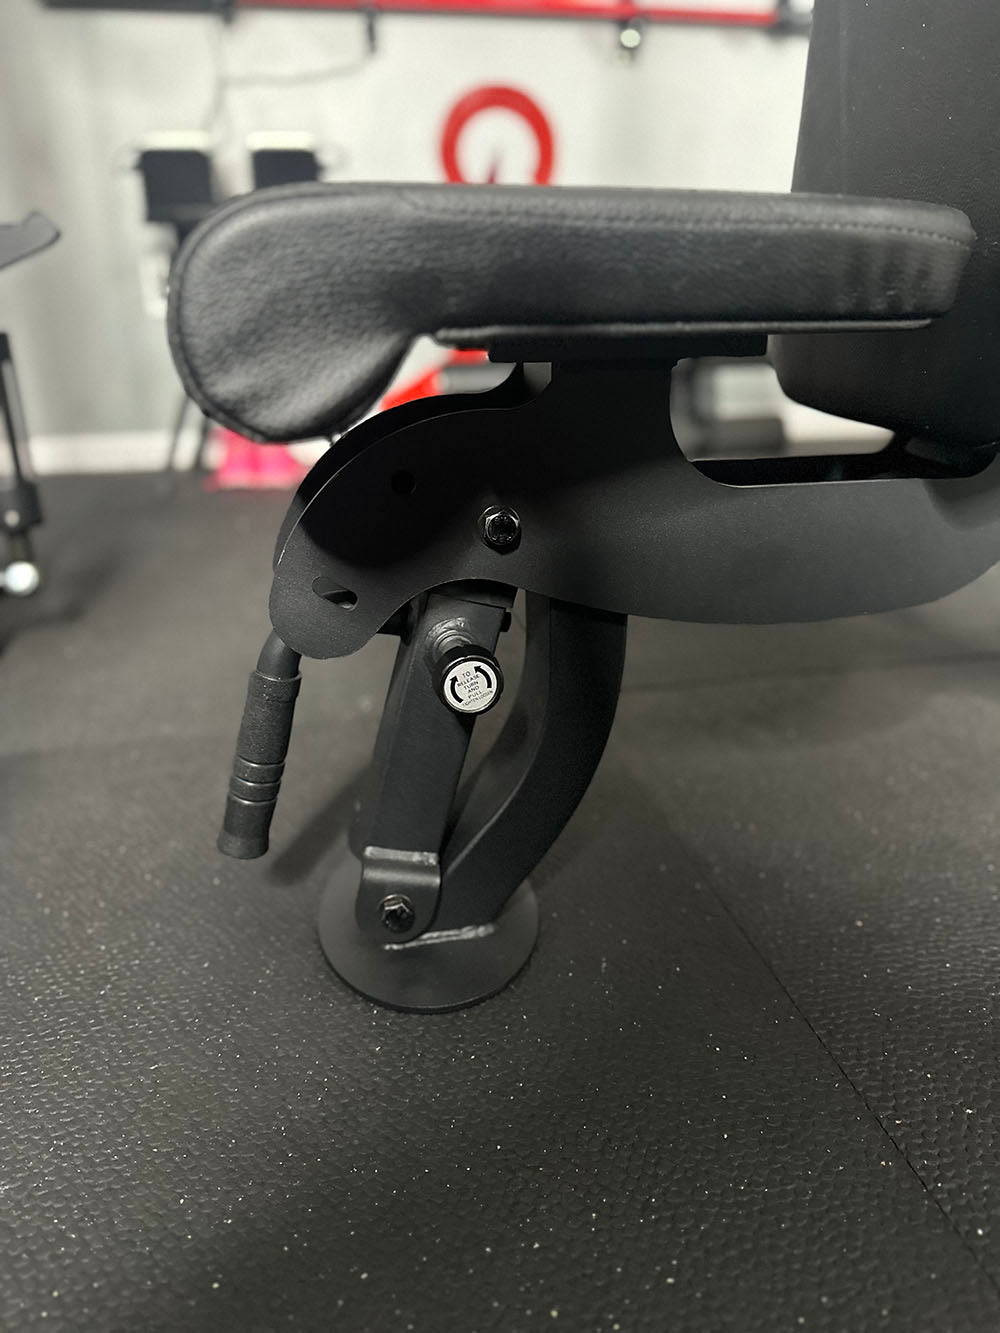 The Edge Infinity Bench is a bench that combines three separate benches all into one bench. You get the benefits of a flat bench, incline bench, and half bench all in one device. This image presents a close up of the seat section of the bench.